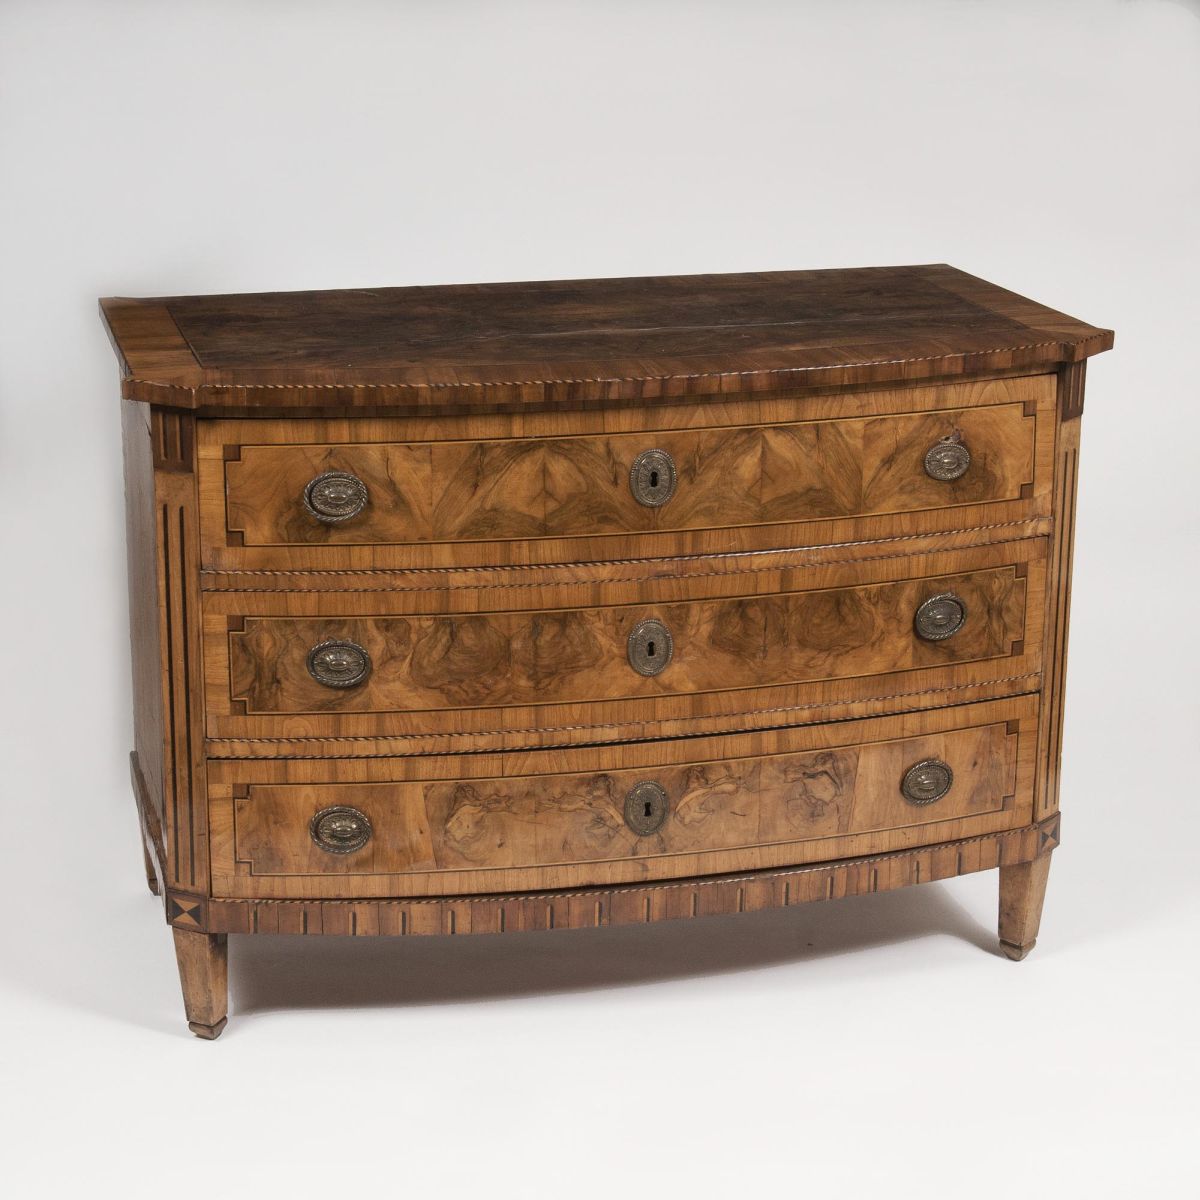 A Louis Seize Chest of Drawers